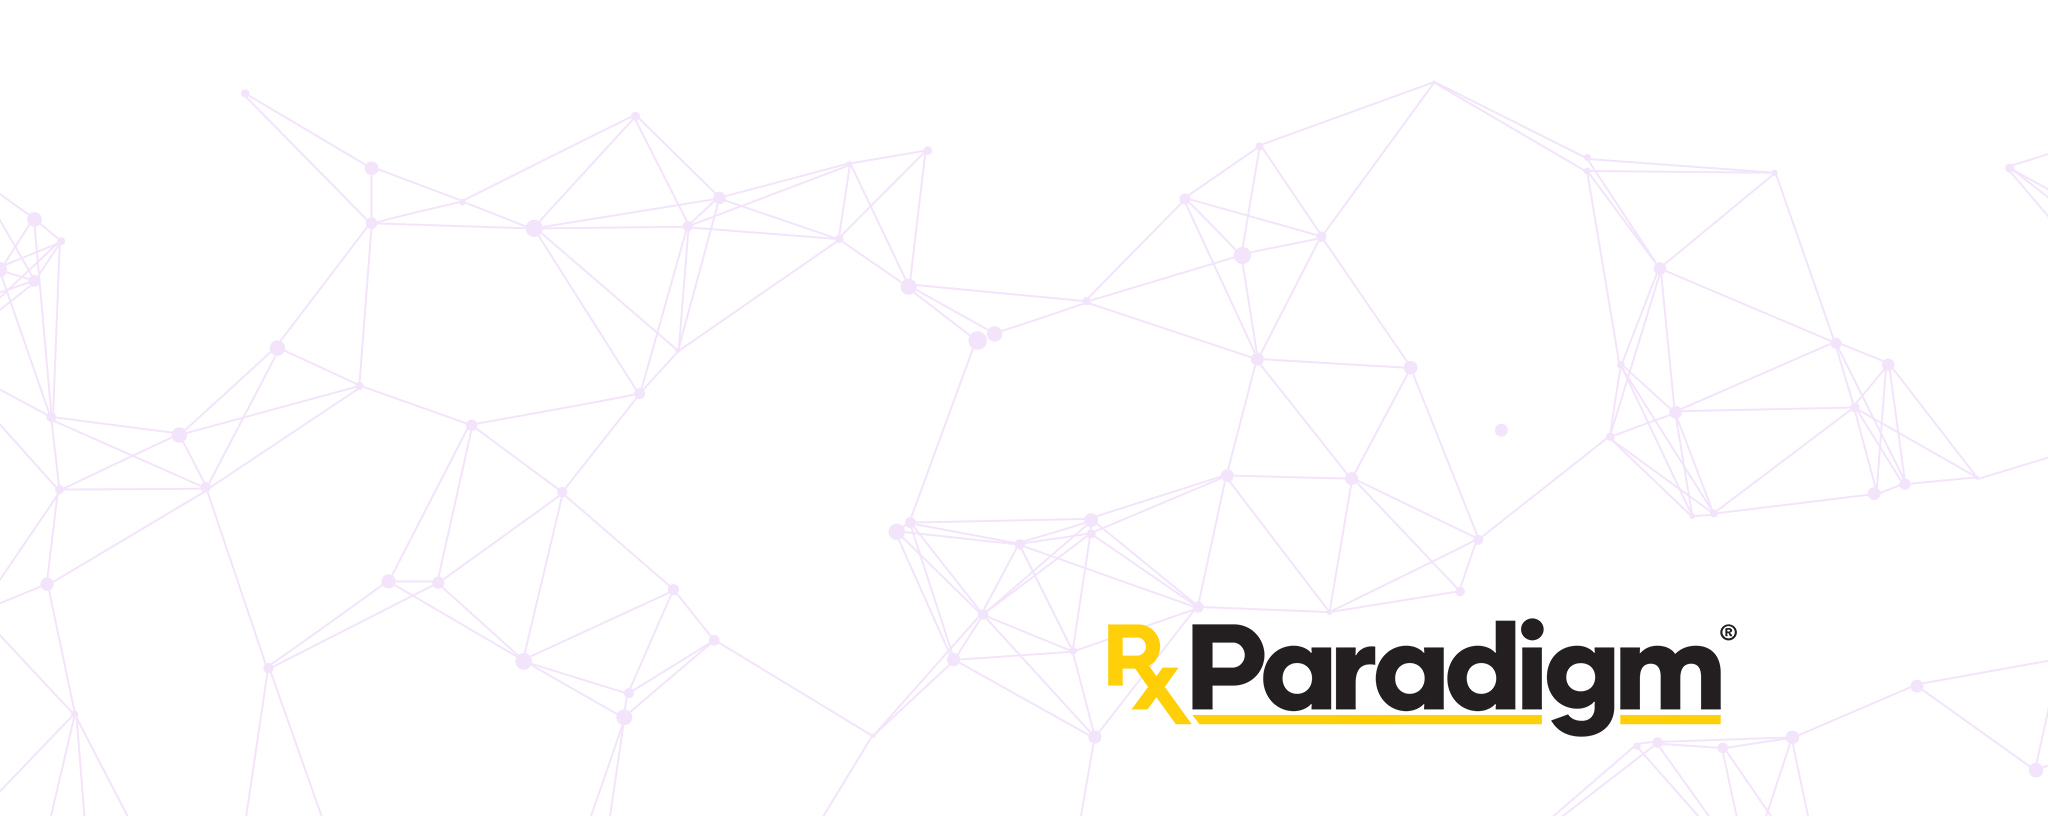 RxParadigm Partners with Scipher Medicine® to Support Medication Utilization, Improve Patient Outcomes, and Lower Costs for Rheumatoid Arthritis Care